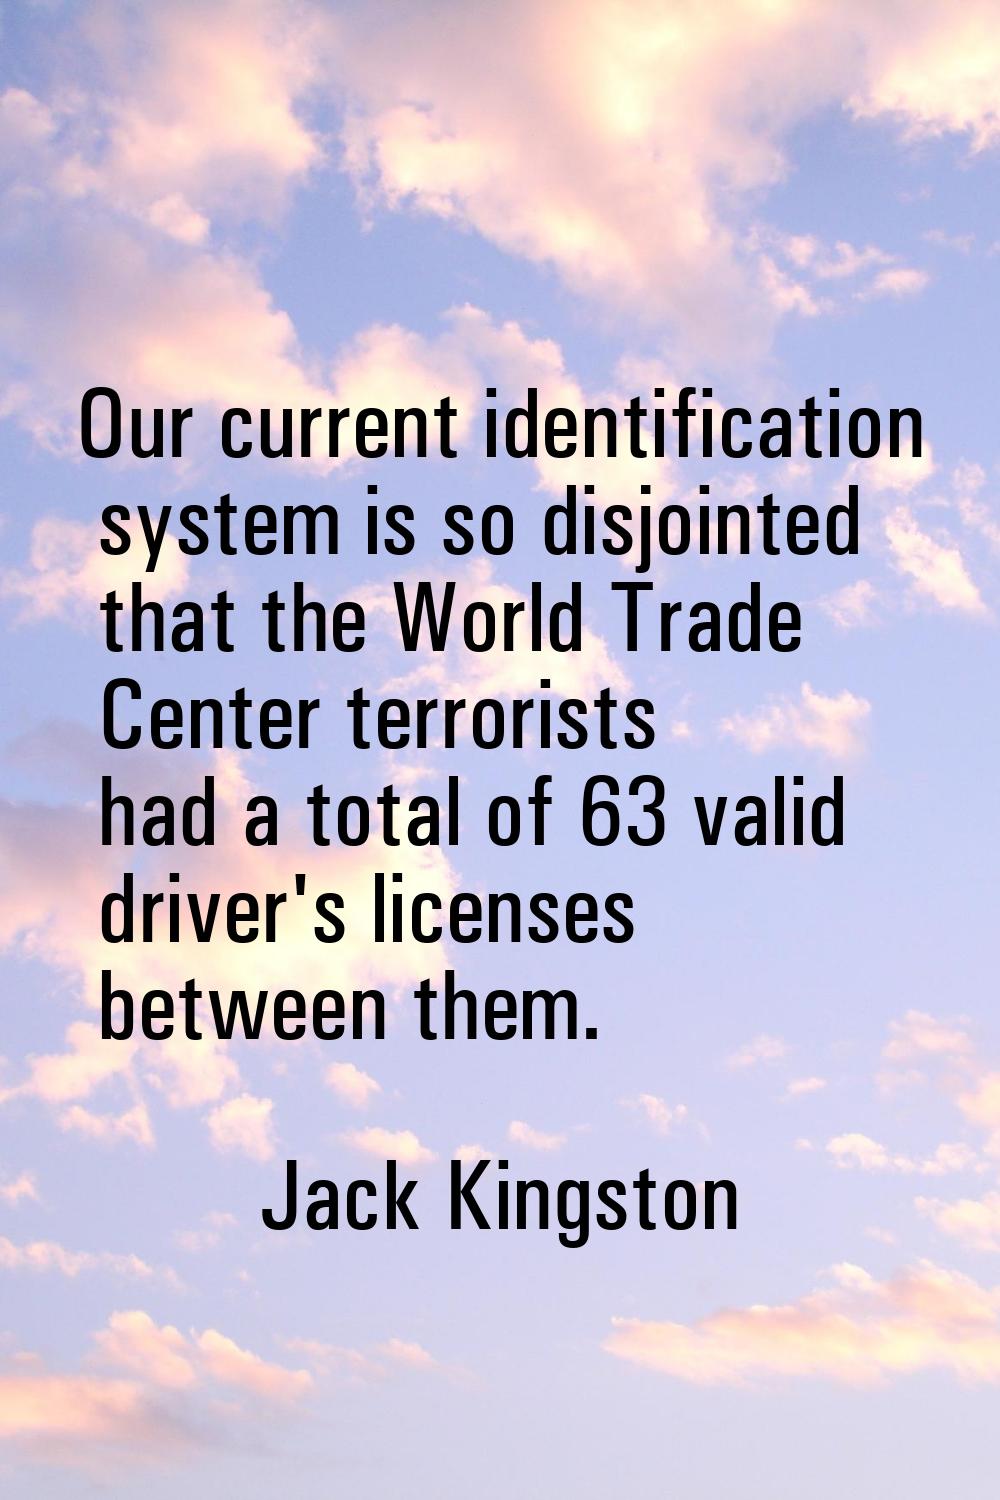 Our current identification system is so disjointed that the World Trade Center terrorists had a tot